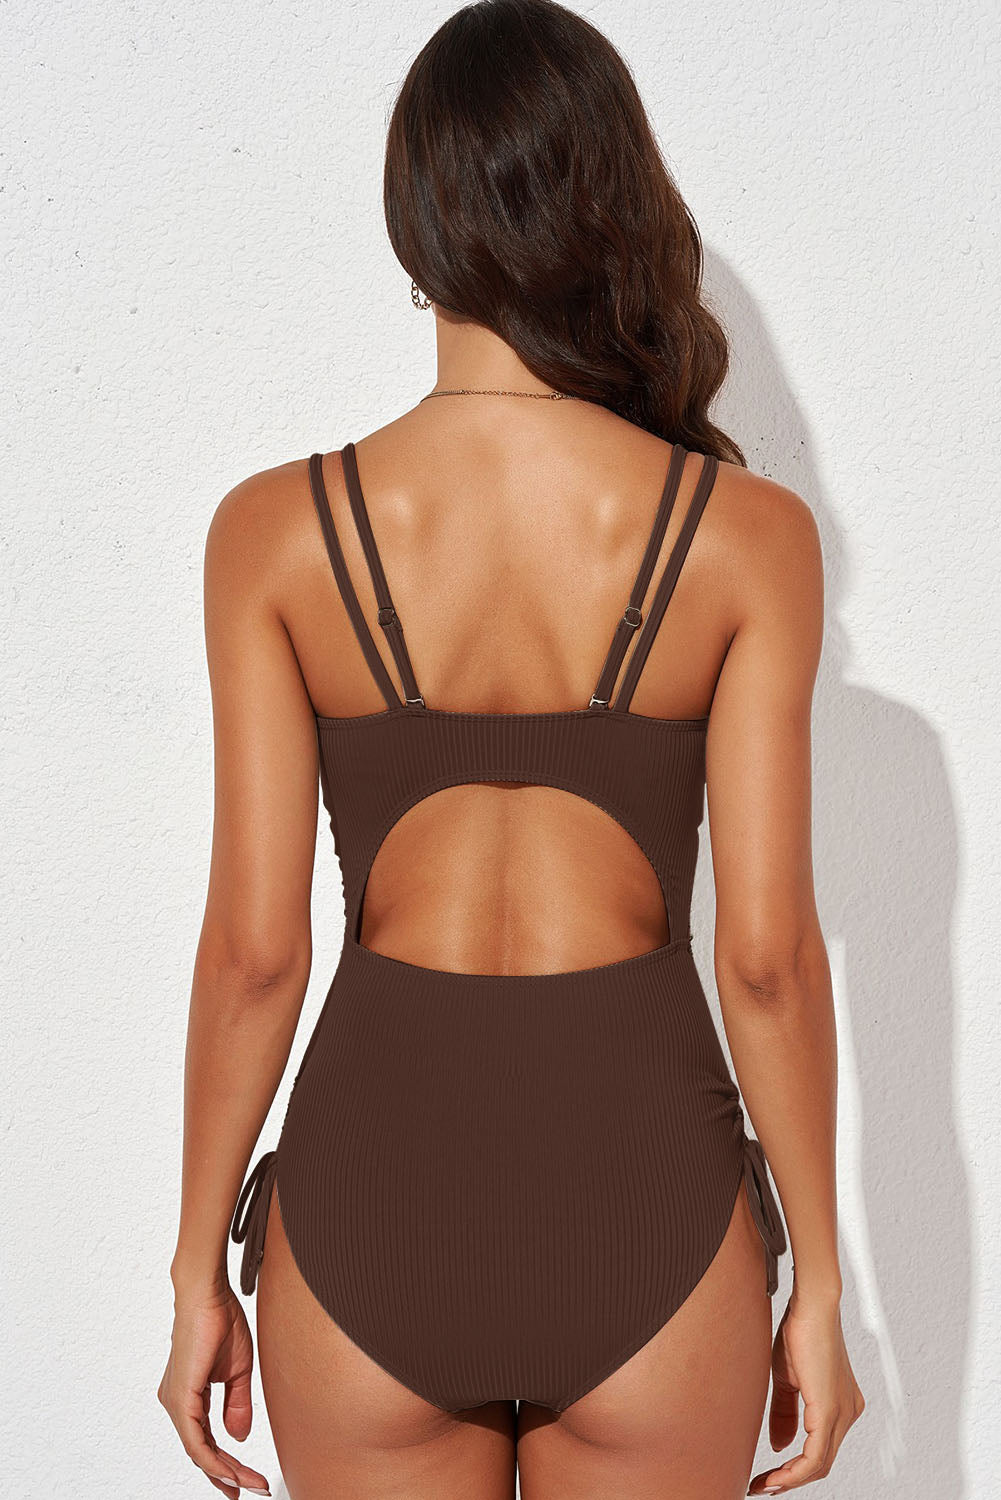 Buy Tied Cutout Plunge One-Piece Swimsuit by Faz